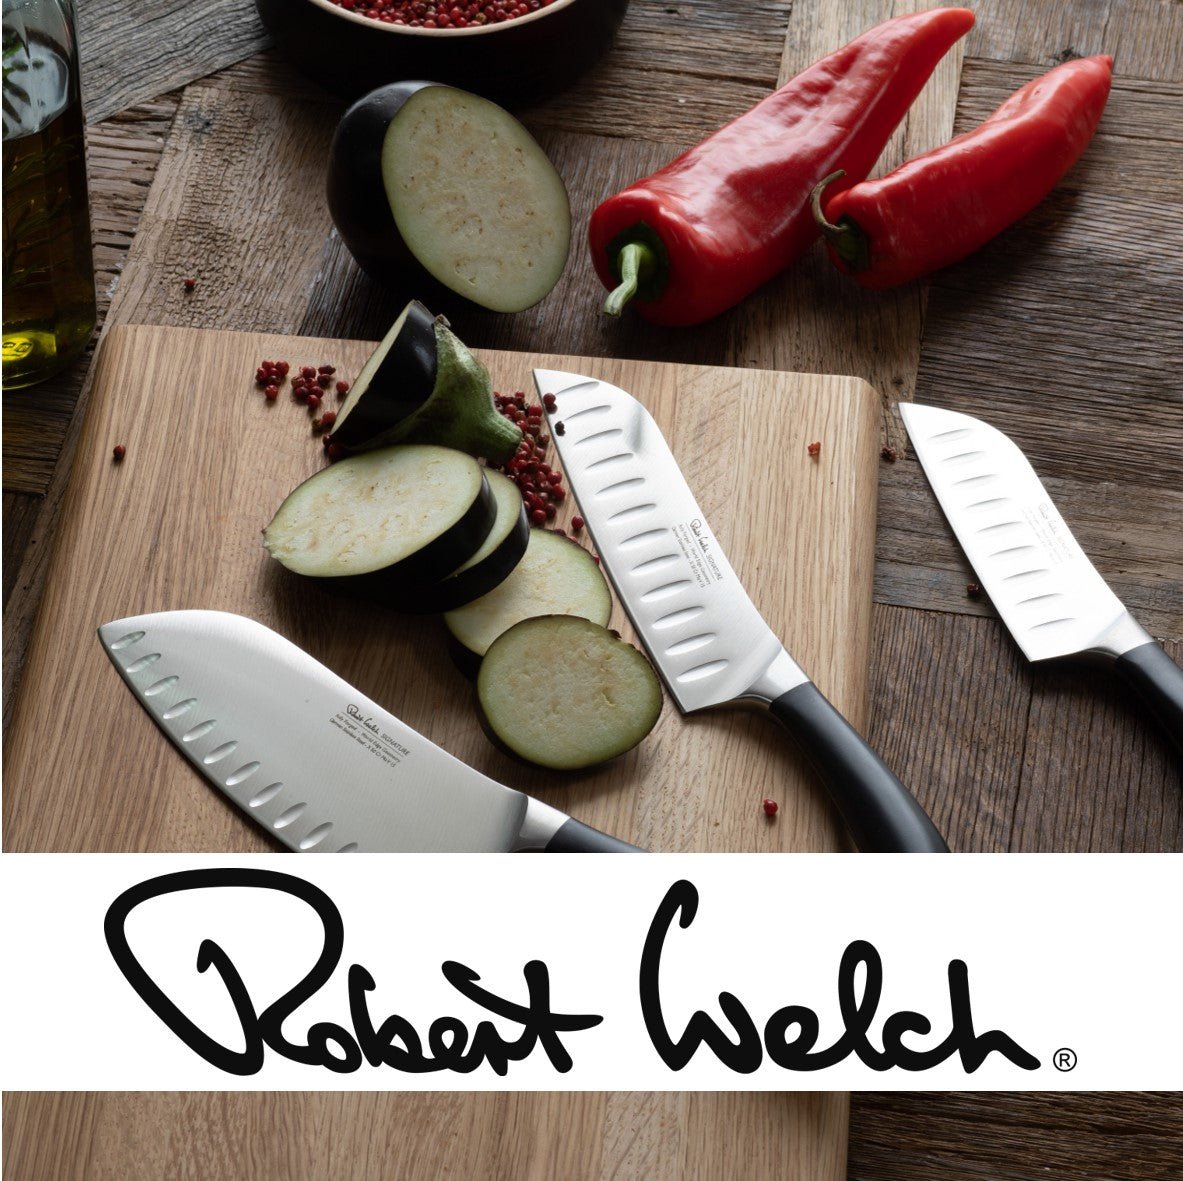 Robert Welch Knives - The Cotswold Knife Company